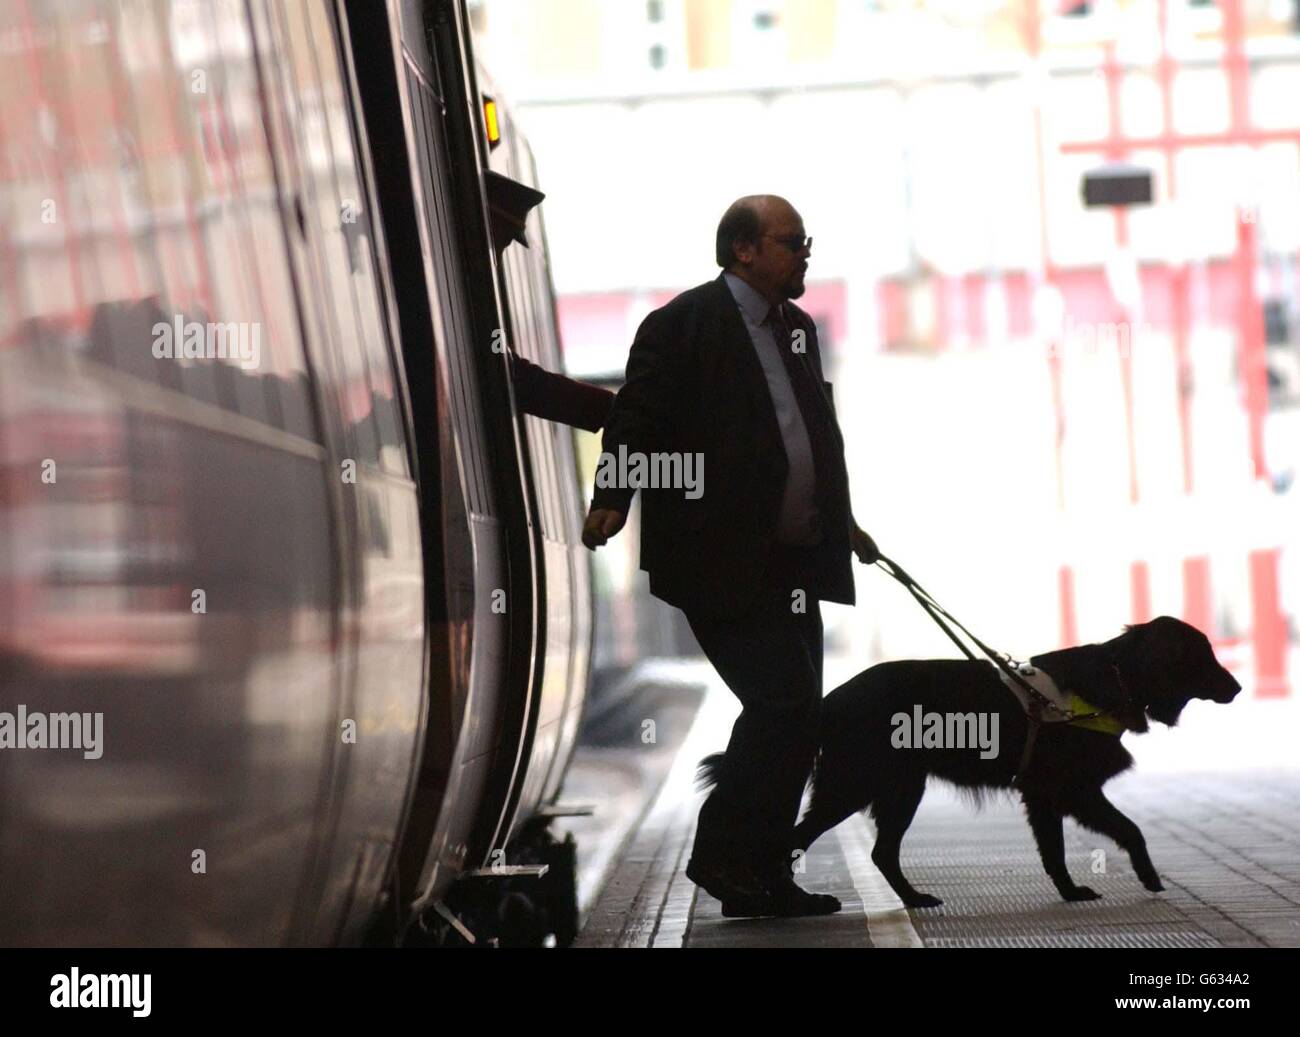 Roger Bailey and his guide dog Jess, disembark a train at London's Marylebone Station, during a photocall to launch the 'Access for All' Campaign by The Guide Dogs for the Blind Association, which aims to make it easier for disabled people to use public transport. Stock Photo